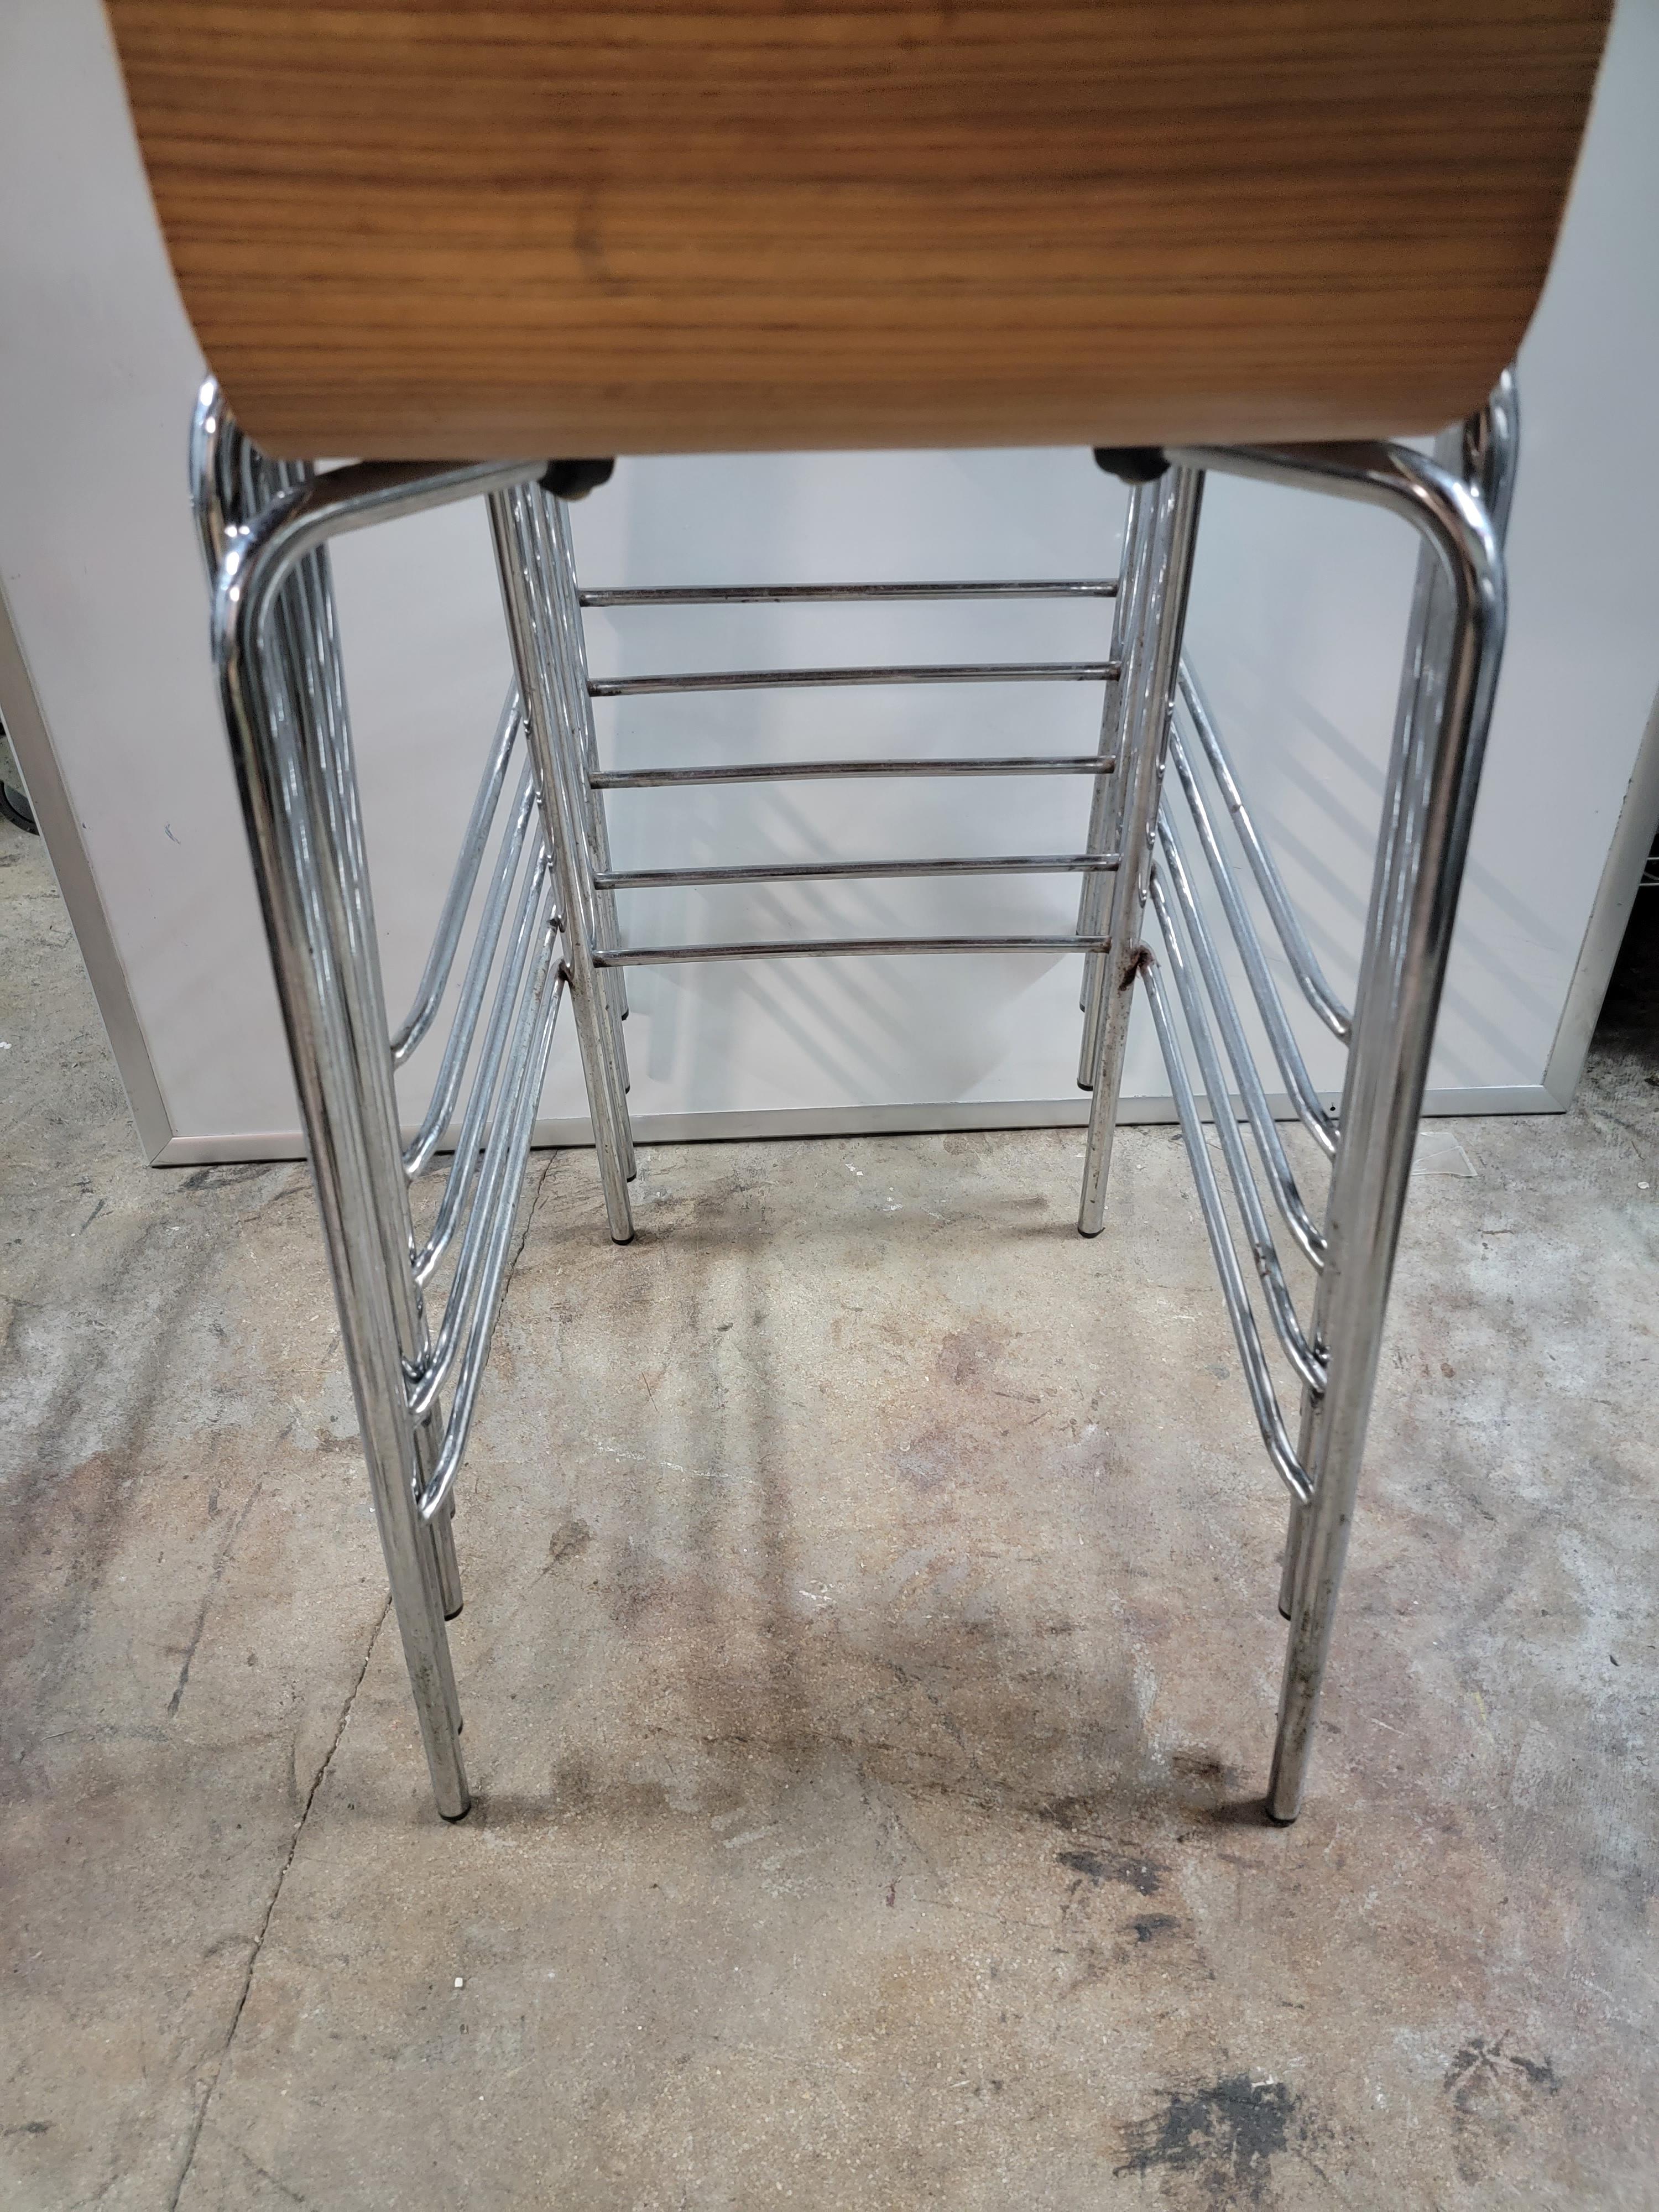 5 Designer 30" Wooden Curved Stainless Steel Bar Stools